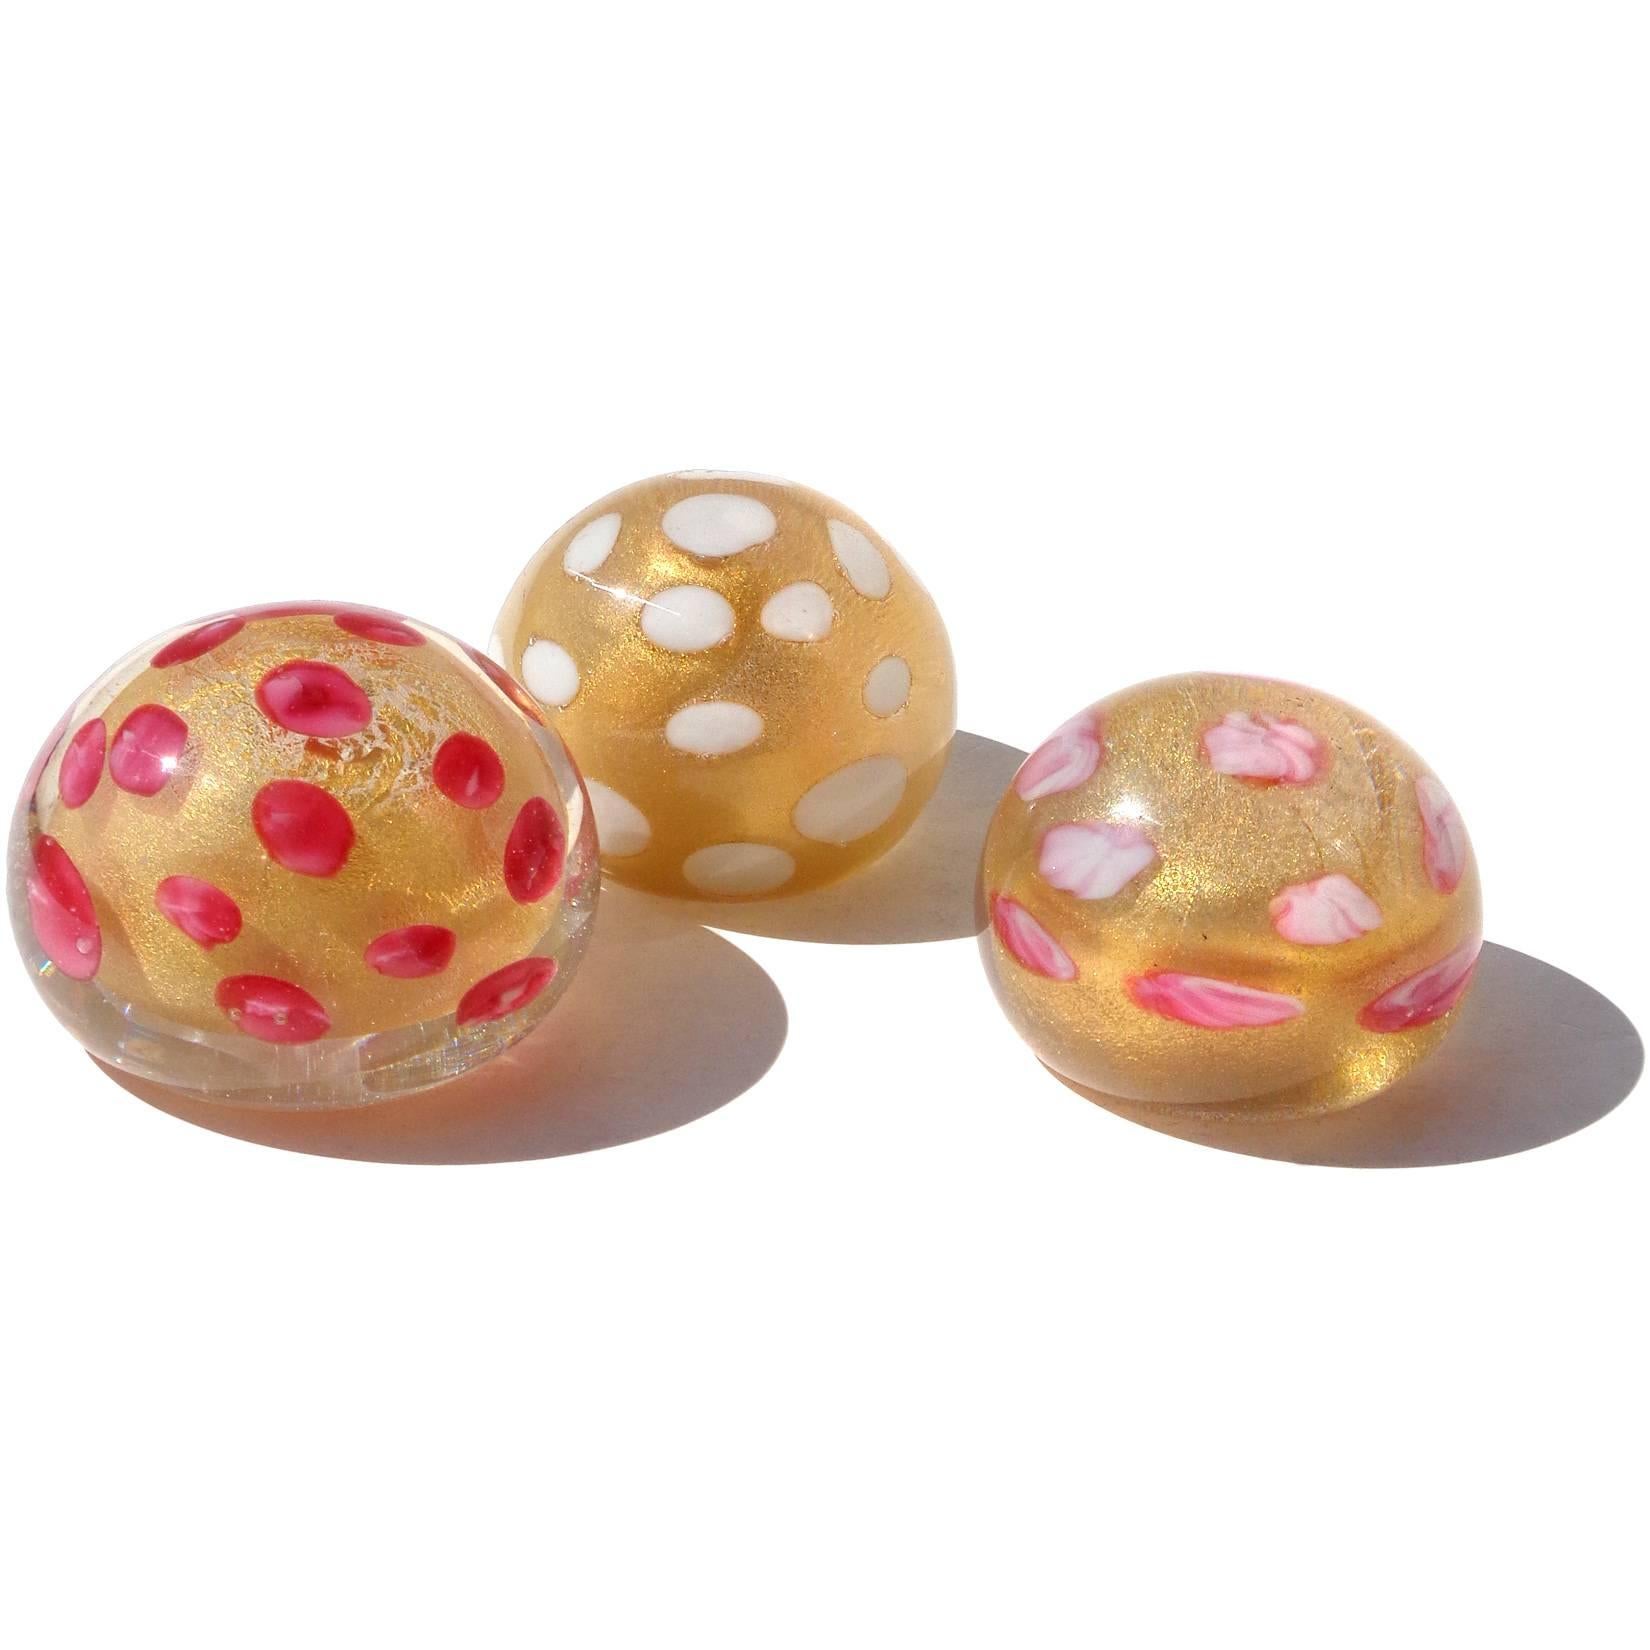 Free shipping worldwide! See details below description.

Beautiful set of three Murano handblown gold flecks art glass paperweights with color spots. Documented to the Barovier e Toso company, in rich dark pink, white, and pink swirl spots.